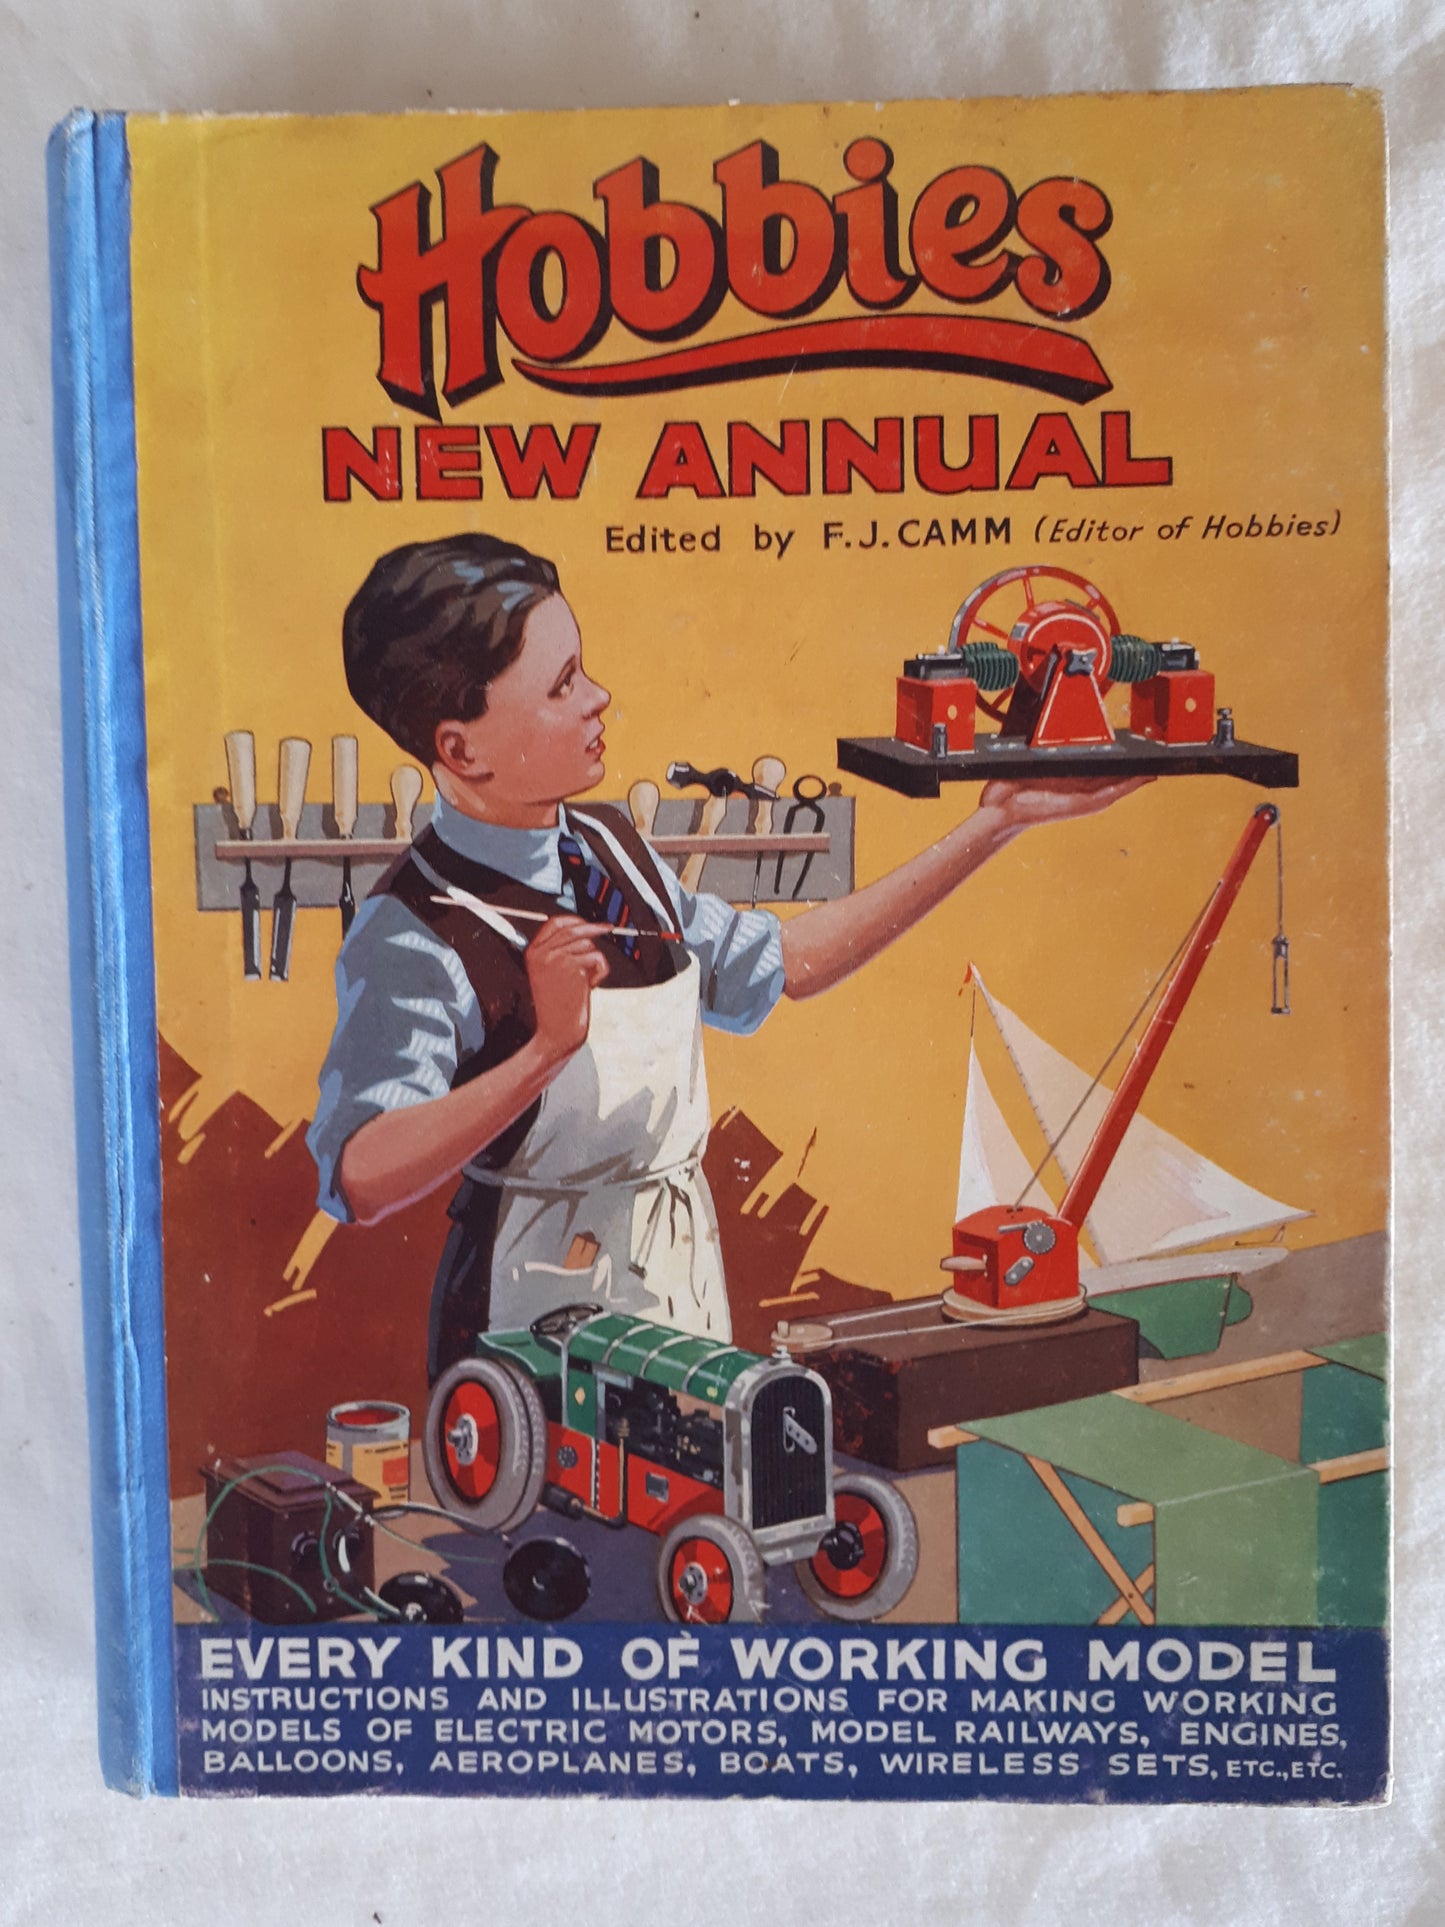 Hobbies New Annual edited by F. J. Camm